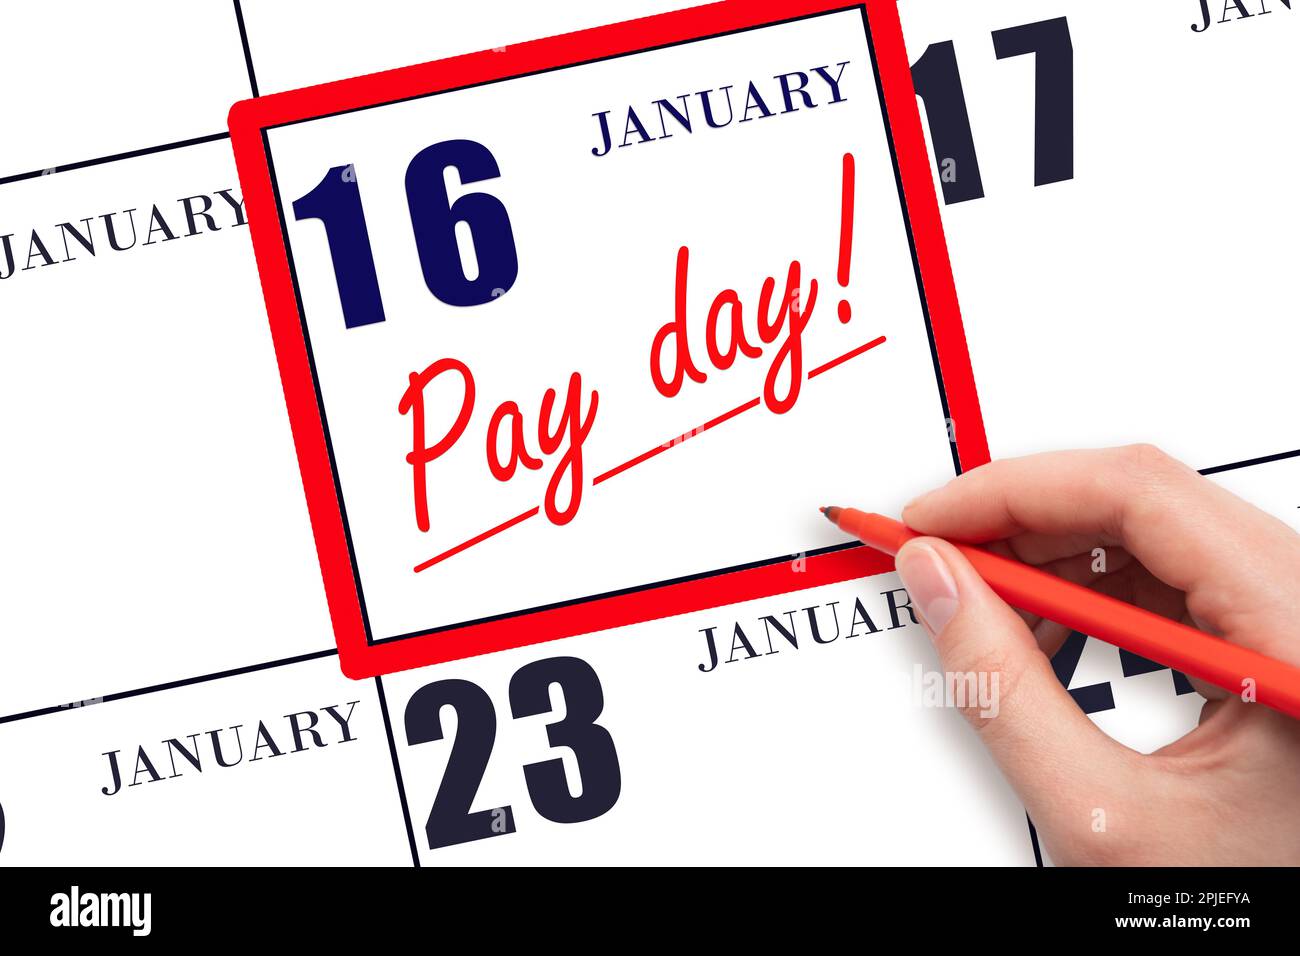 16th day of January. Hand writing text PAY DATE on calendar date January 16 and underline it. Payment due date. Reminder concept of payment. Winter mo Stock Photo